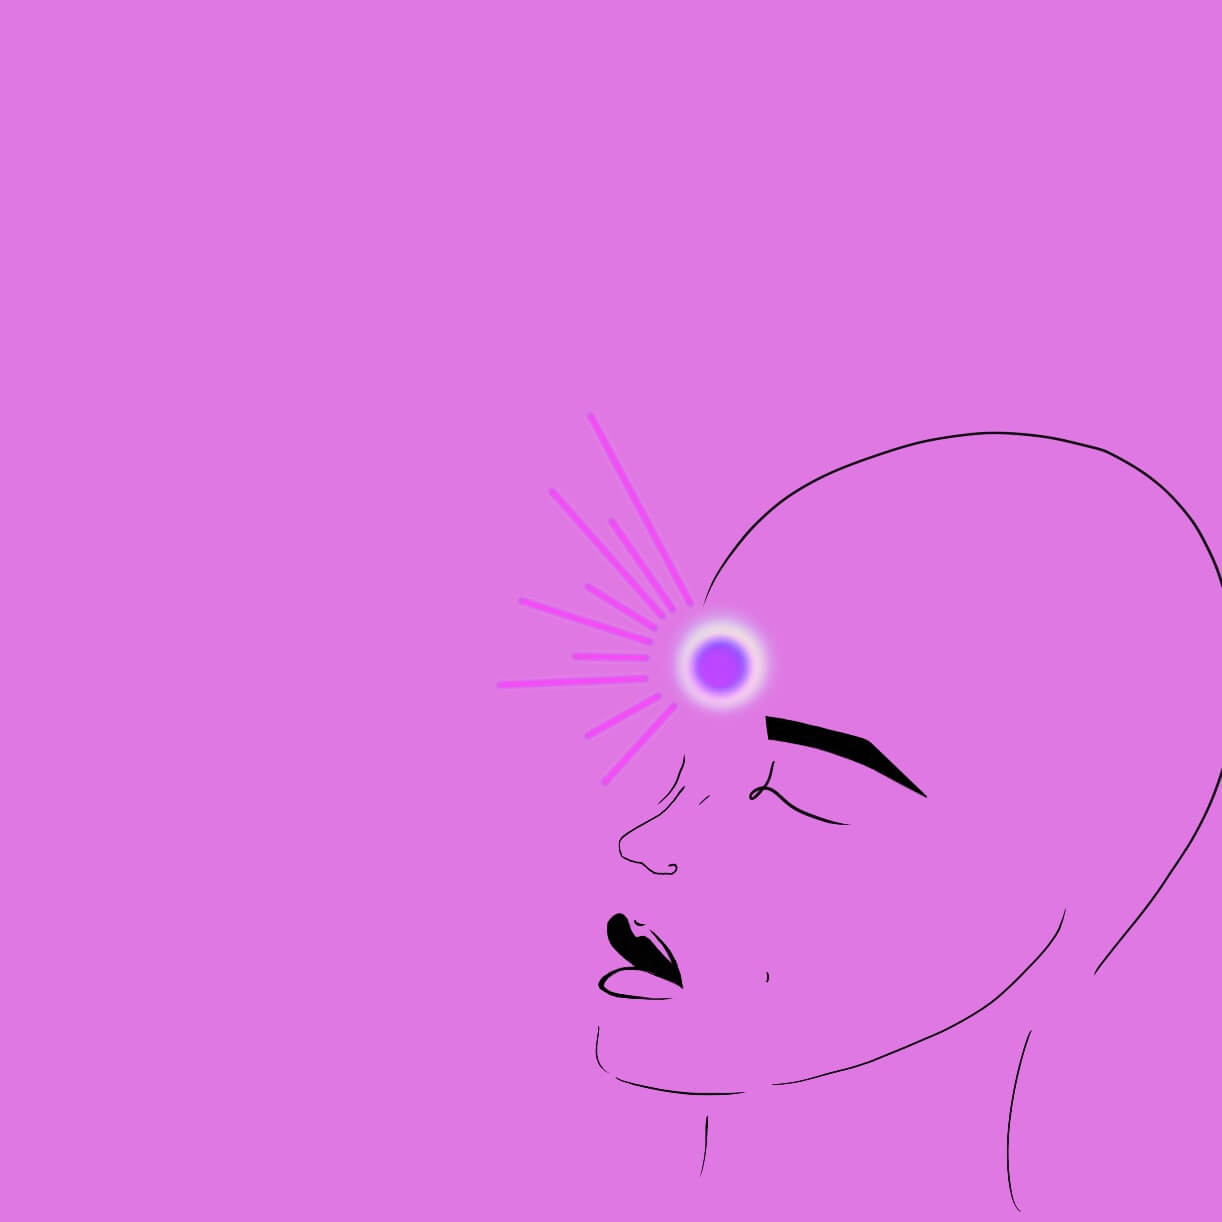 A drawing of a bald person on a purple background